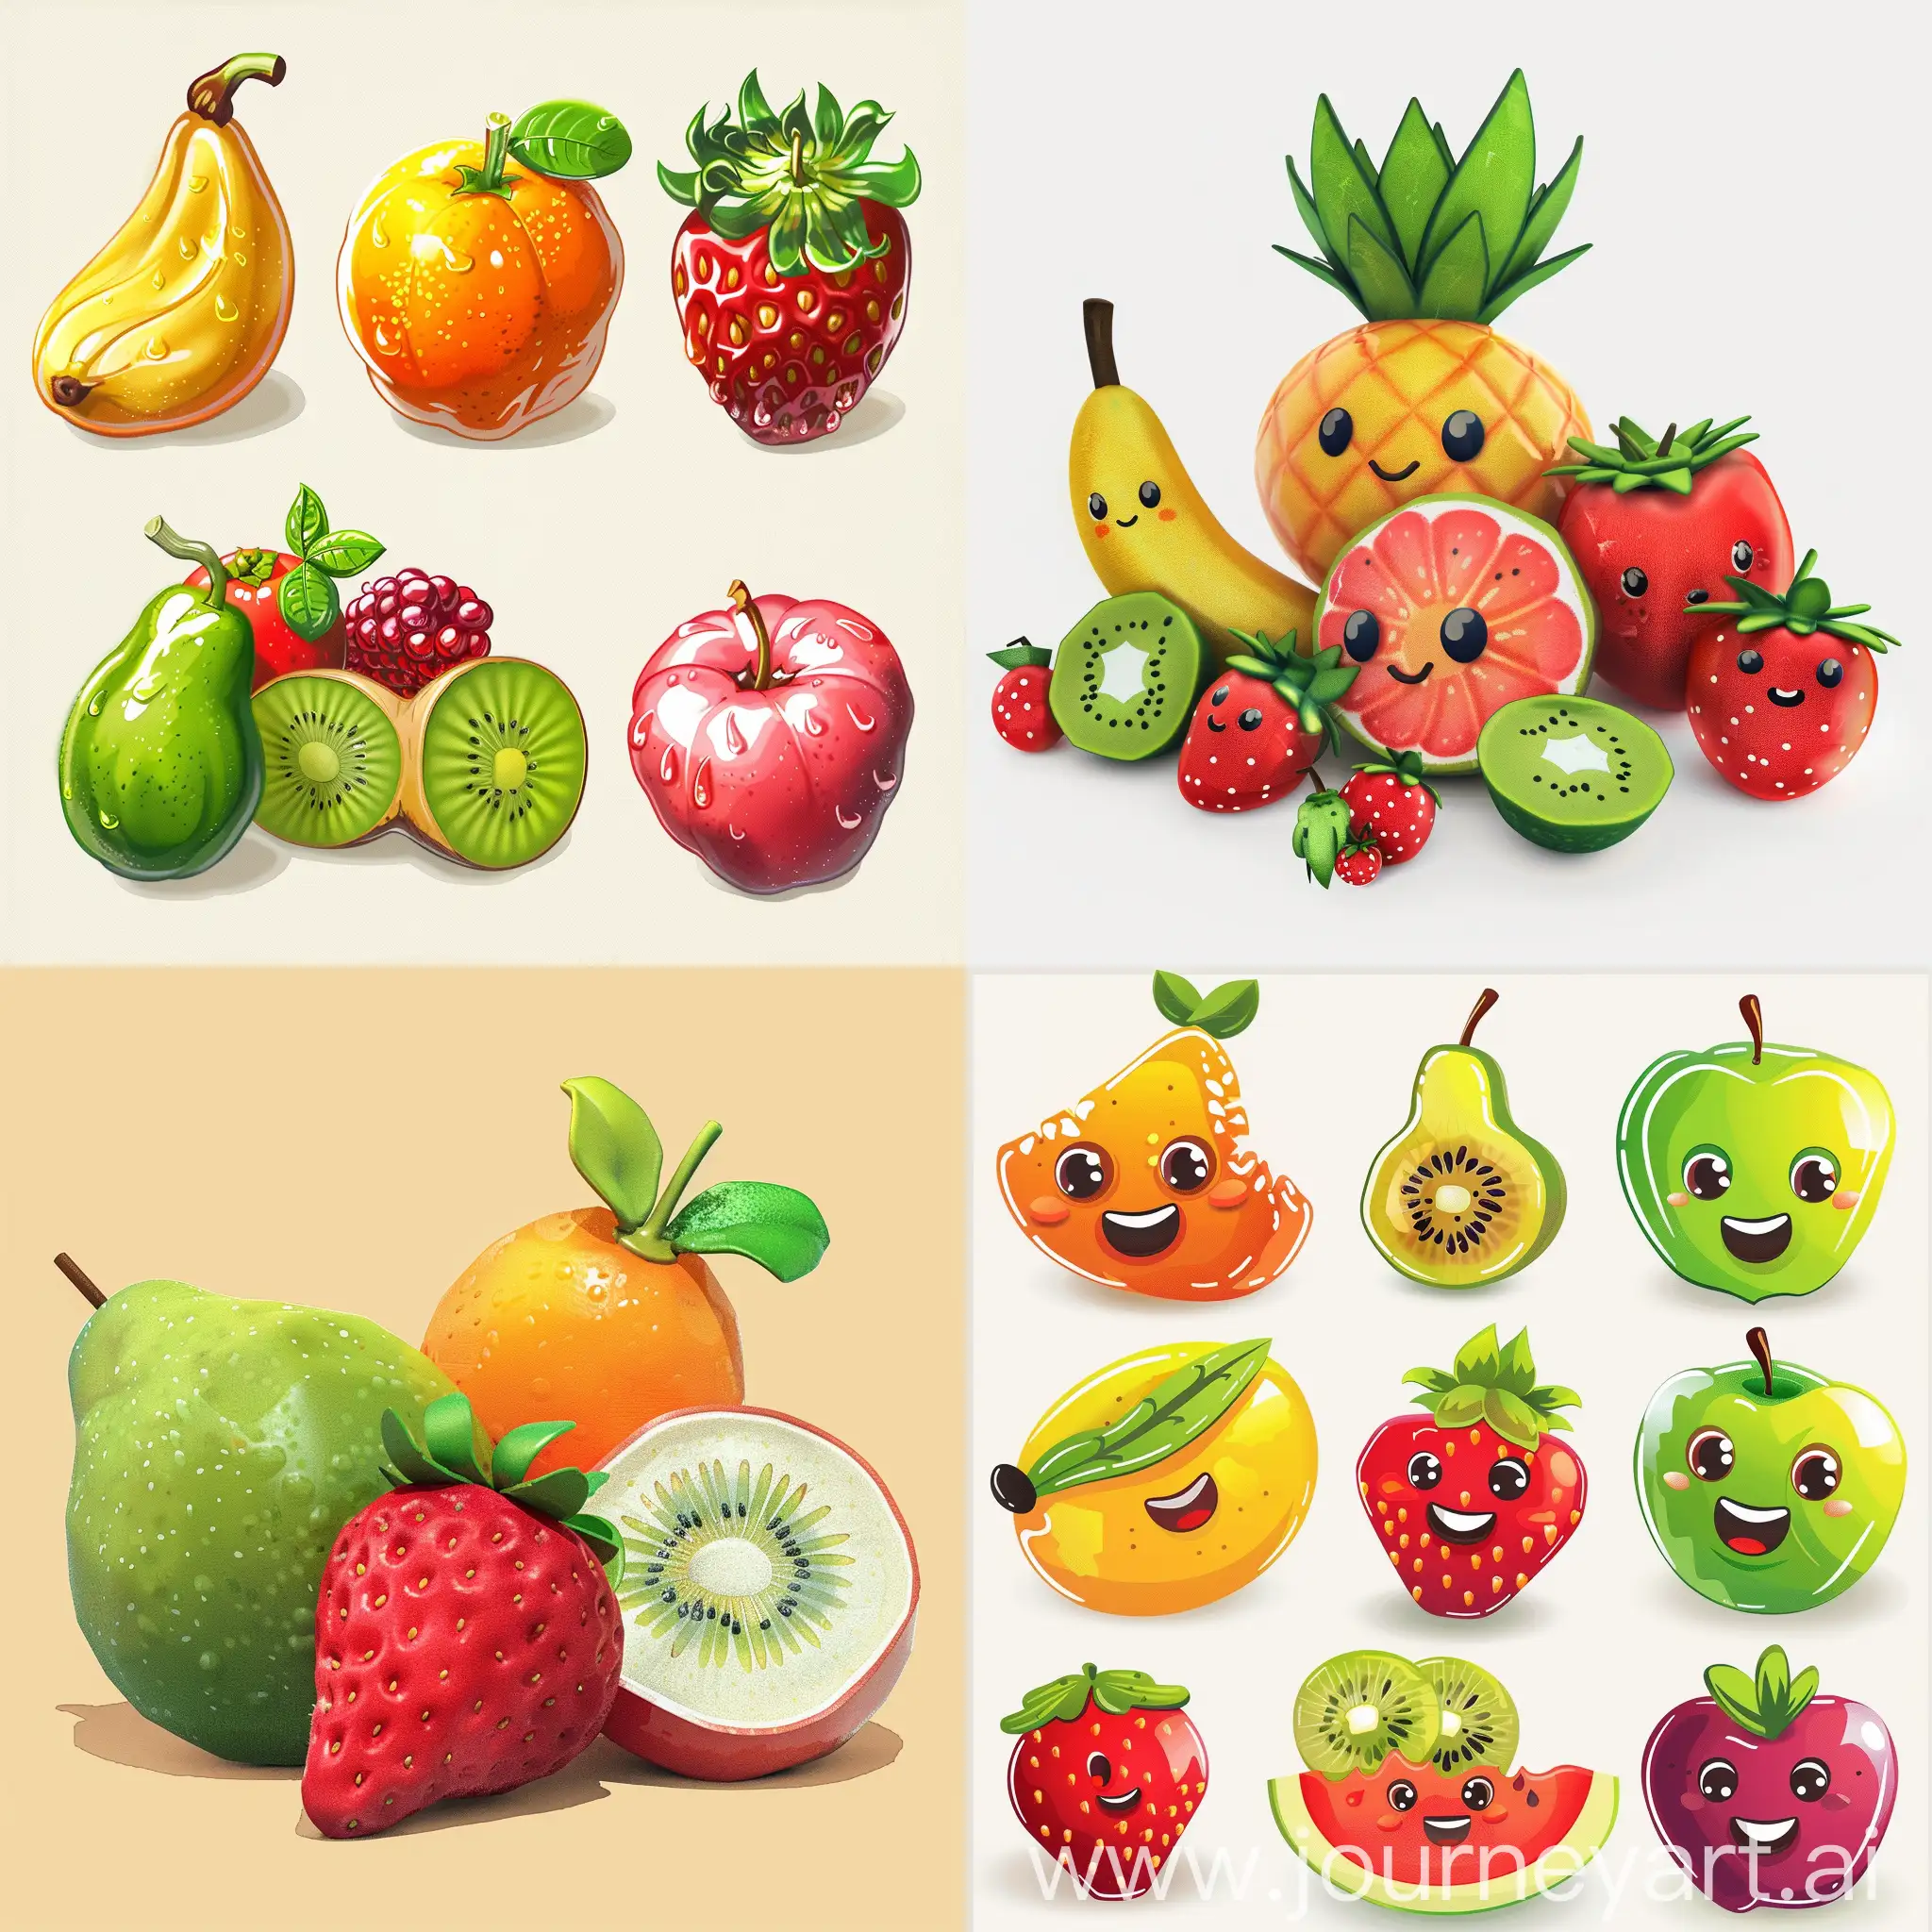 Adorable-2D-Fruits-Vibrant-Illustrated-Drawings